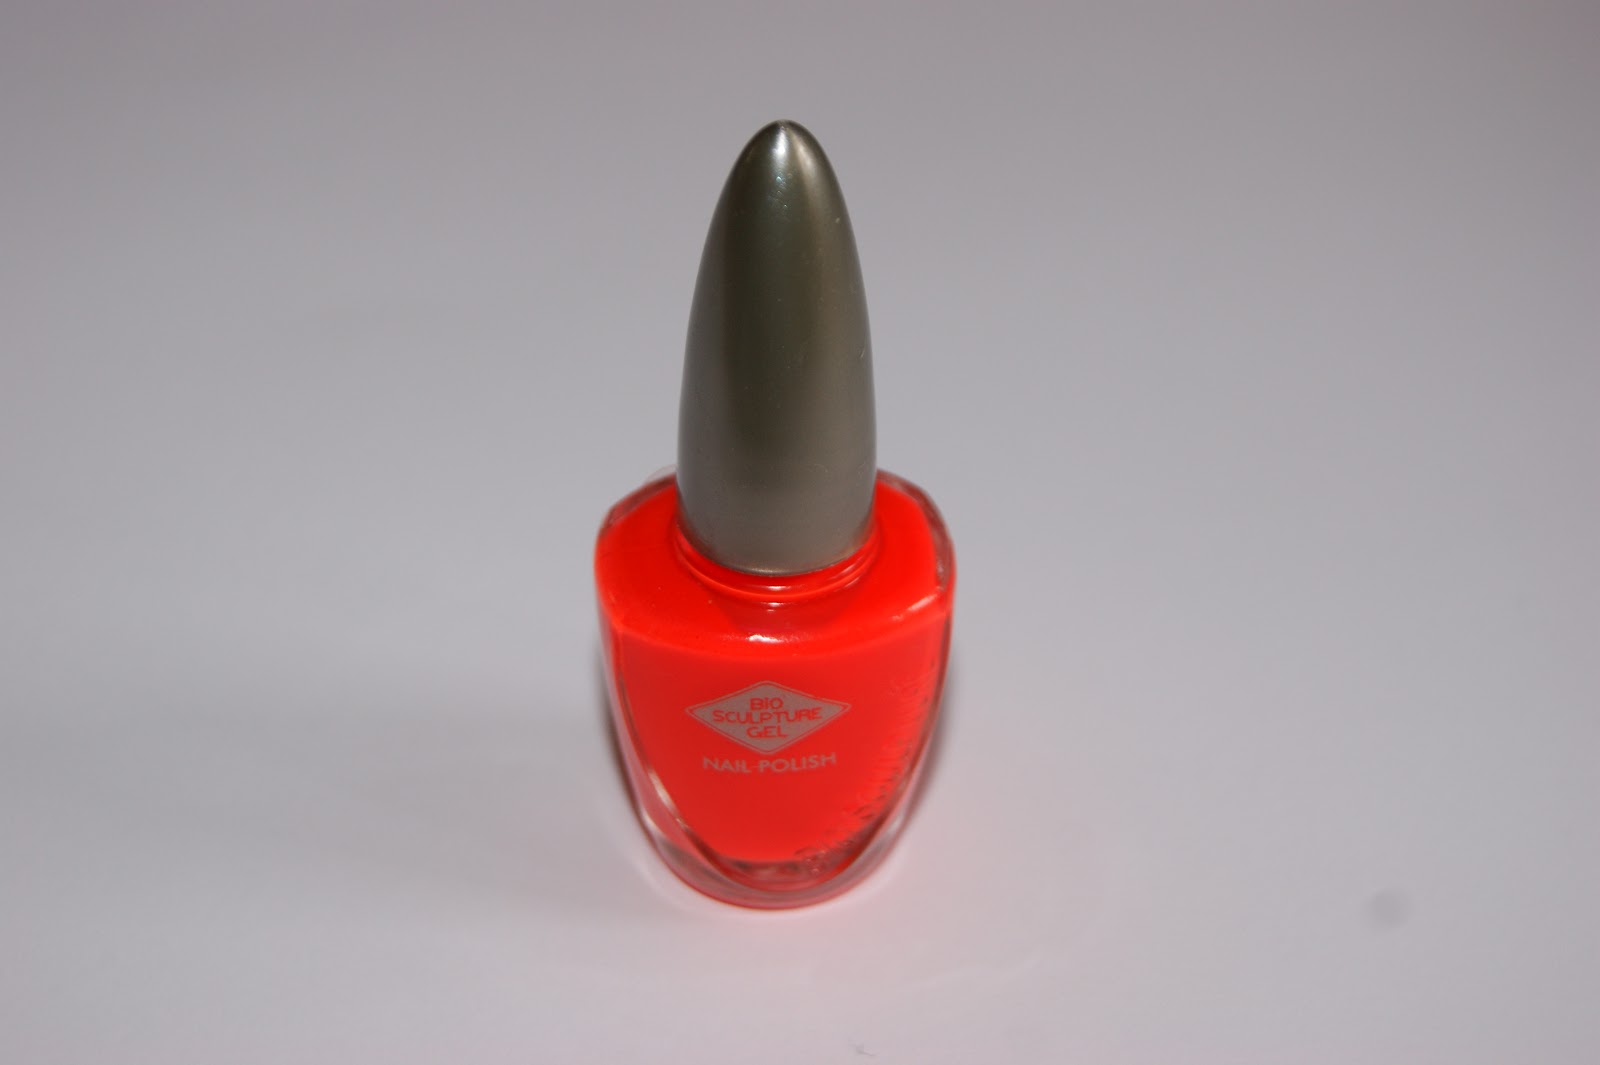 Bio Sculpture Gel Nail Polish in Sweet Melon Fluo - Review